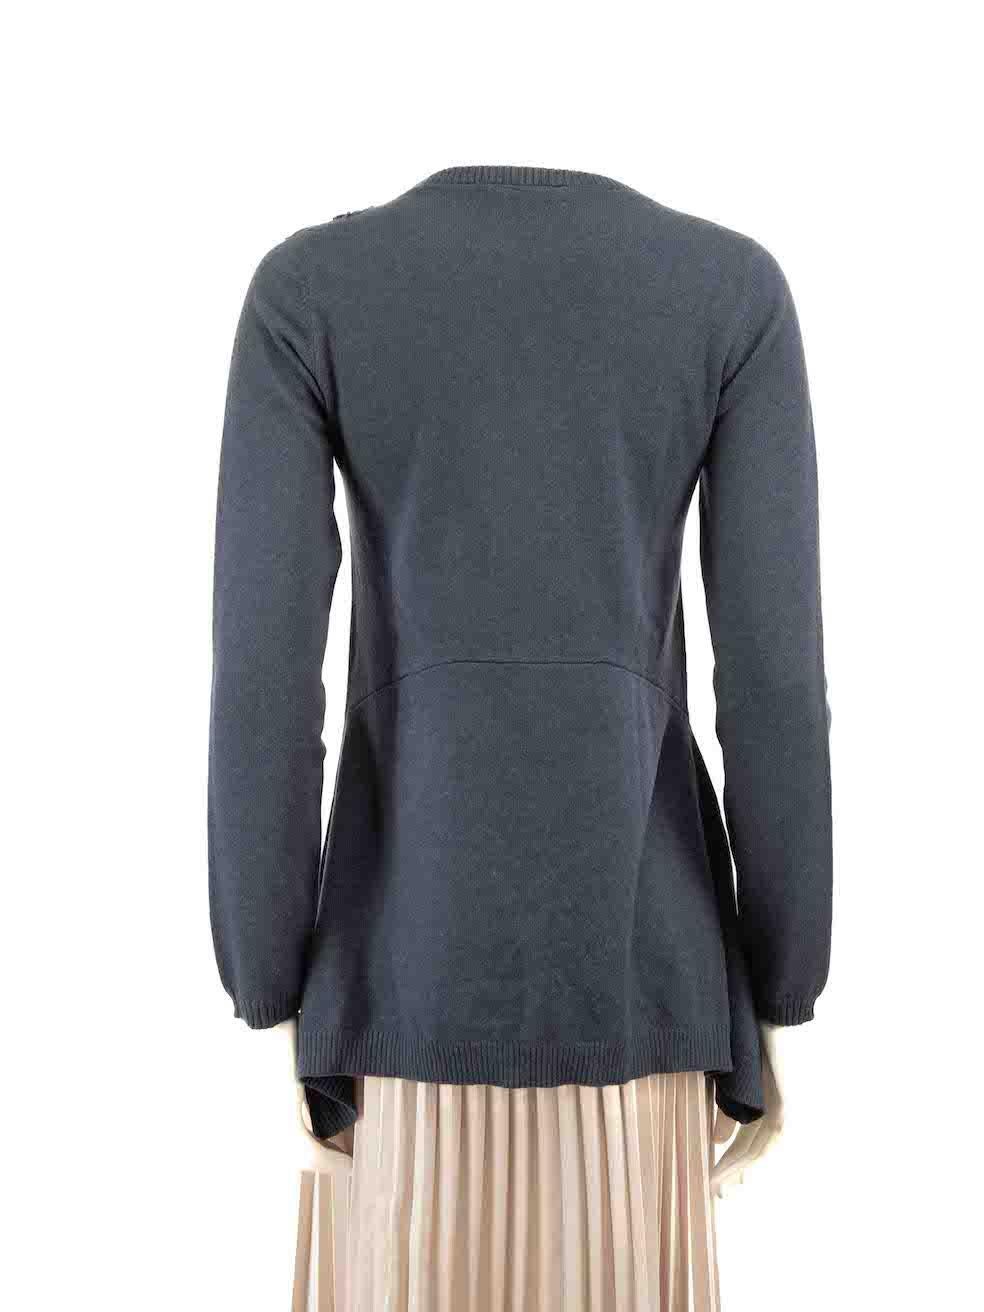 Brunello Cucinelli Blue Cashmere Floral Jumper Size M In Good Condition For Sale In London, GB